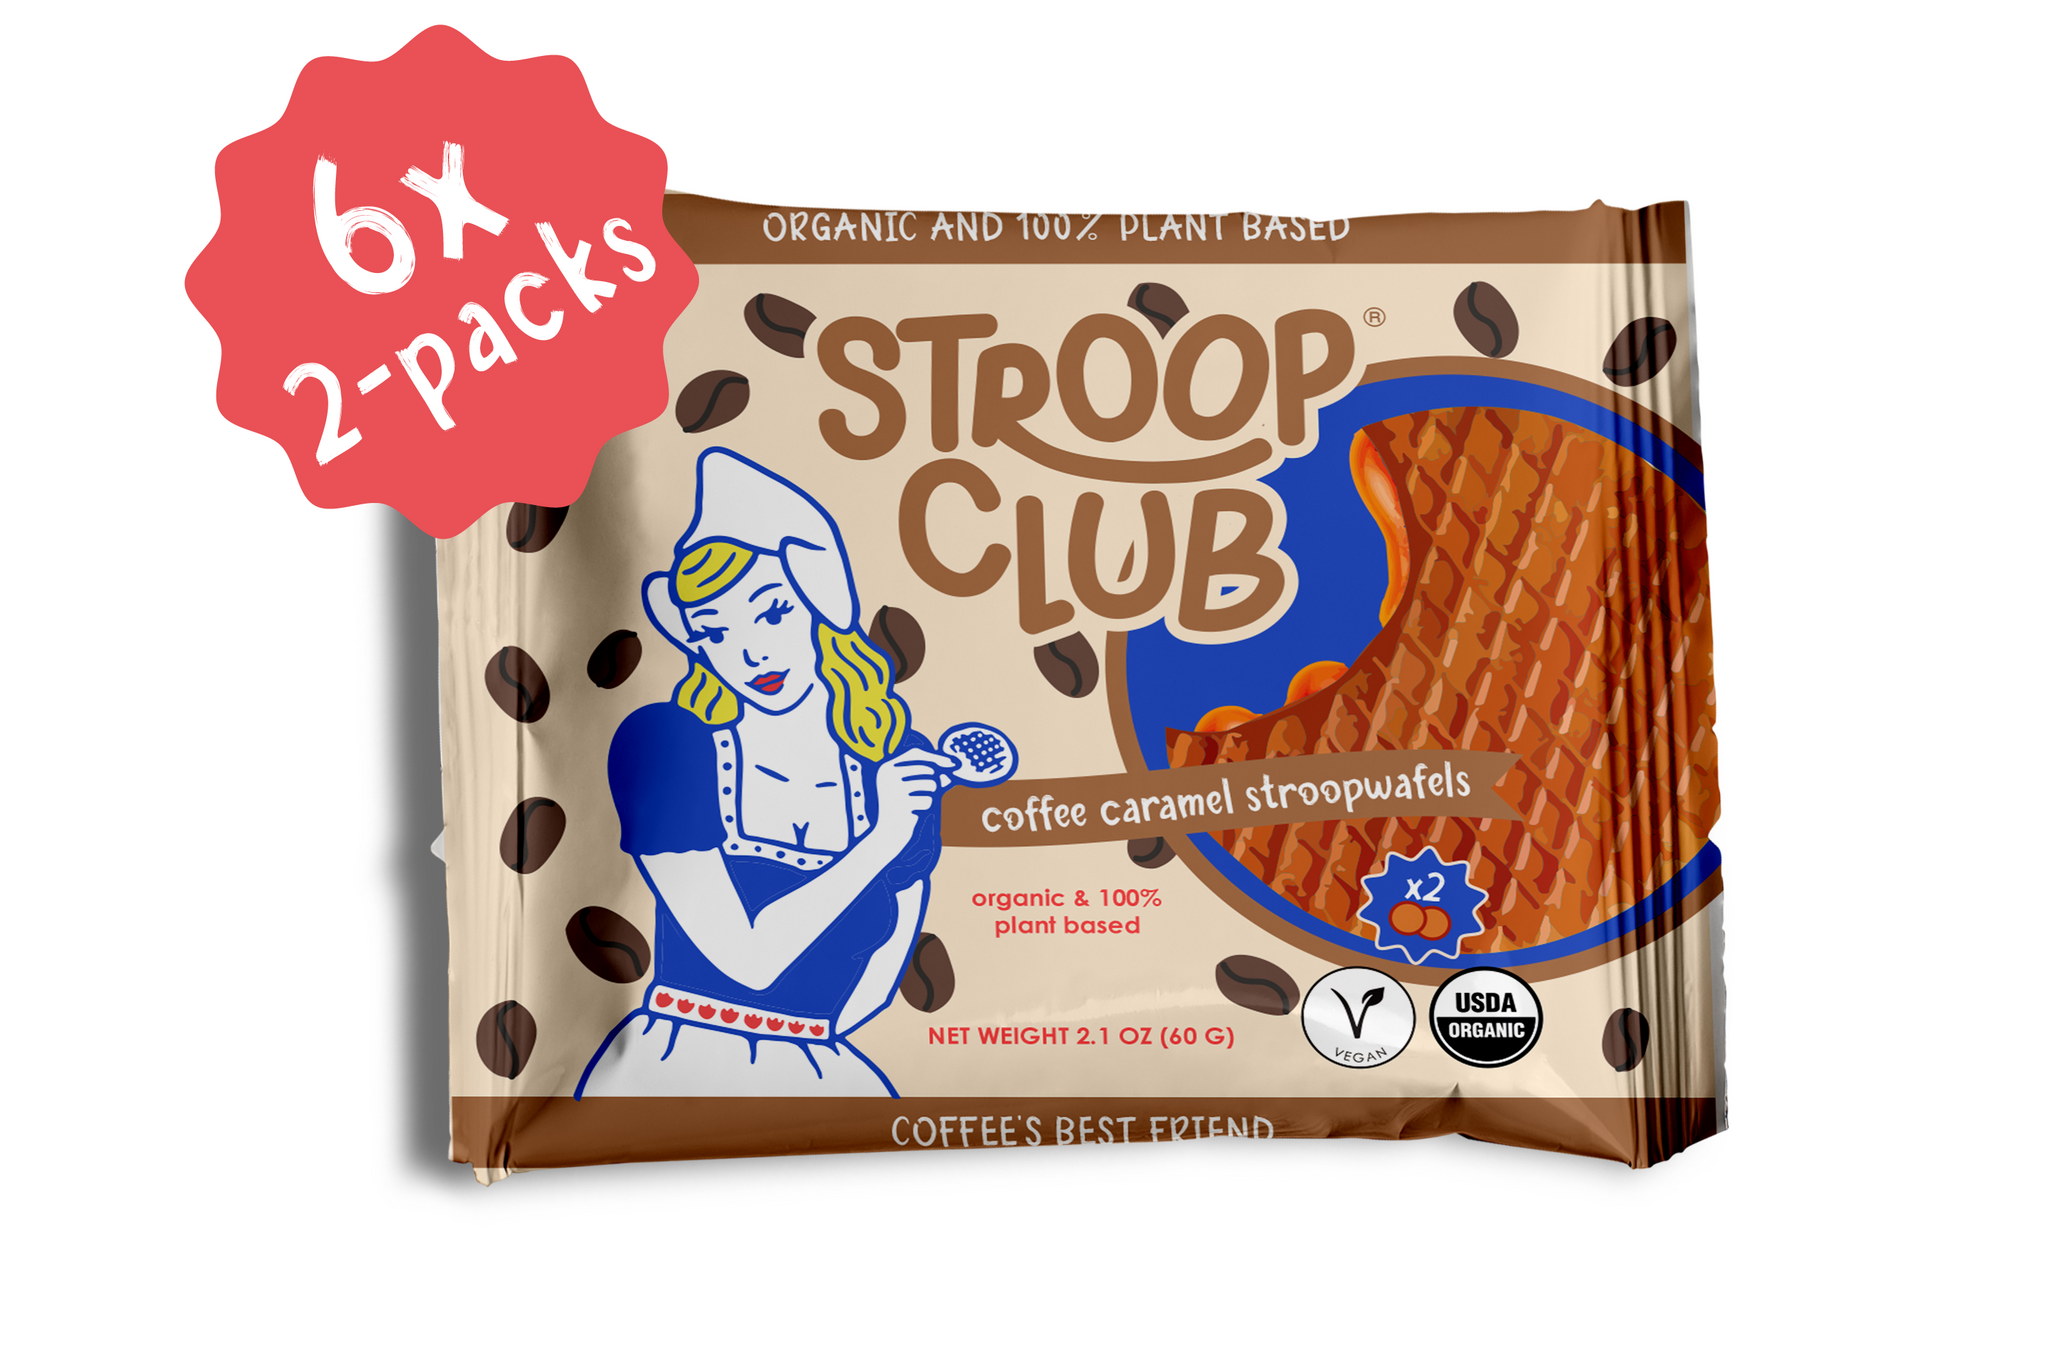 Coffee Caramel Plant Based and Organic Stroopwafels (6x 2-pack - 12 total)